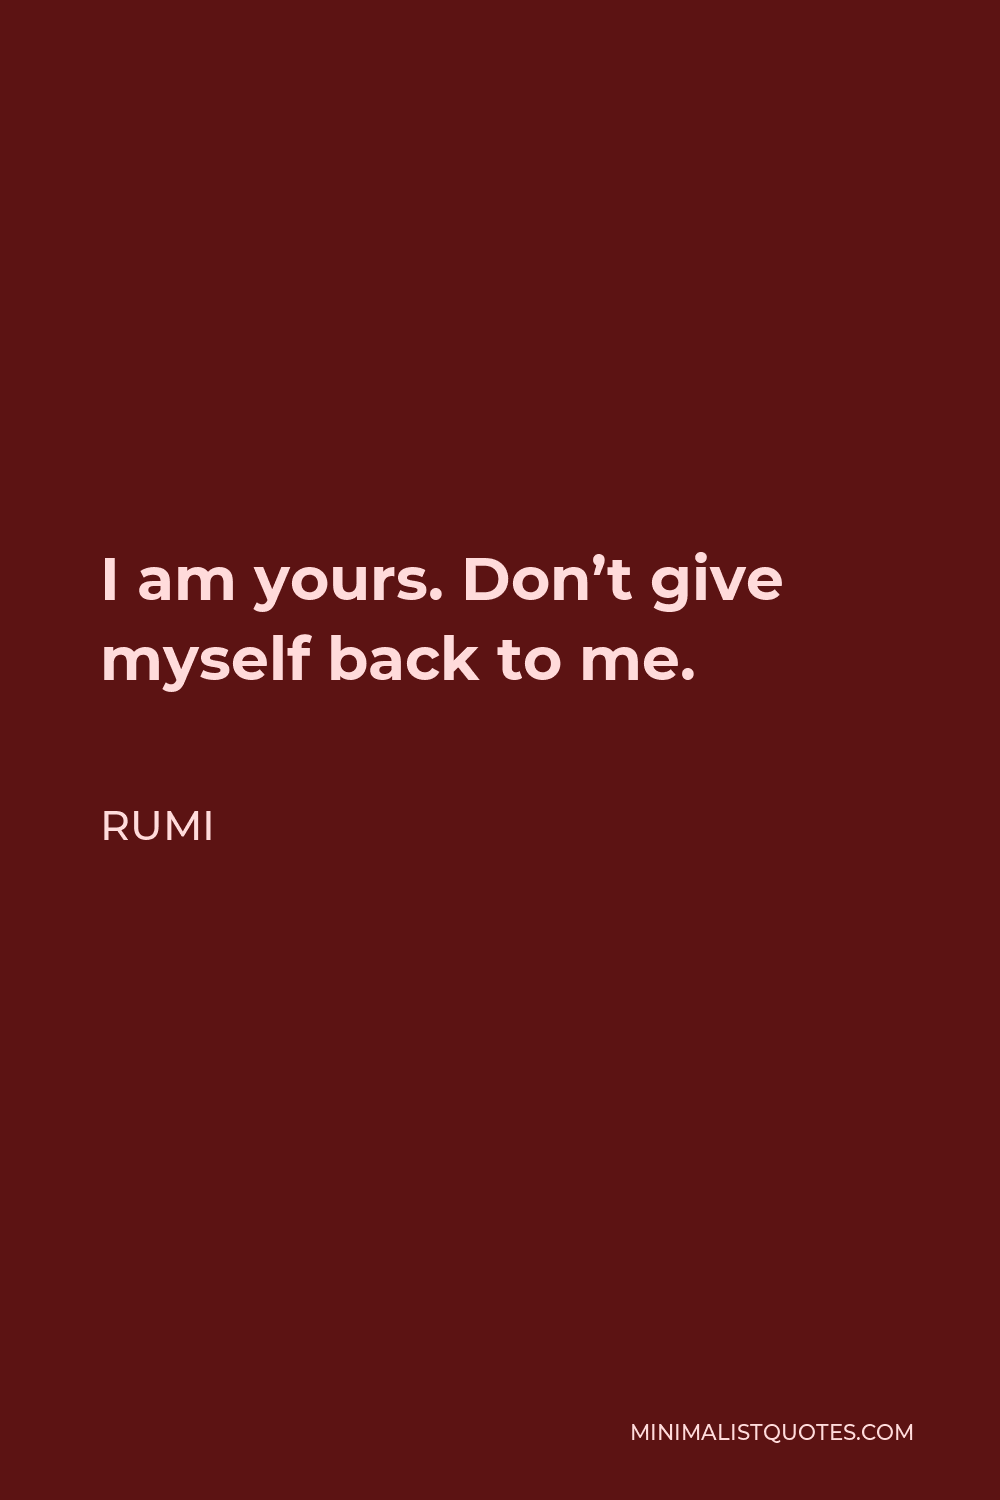 Rumi Quote - I am yours. Don’t give myself back to me.